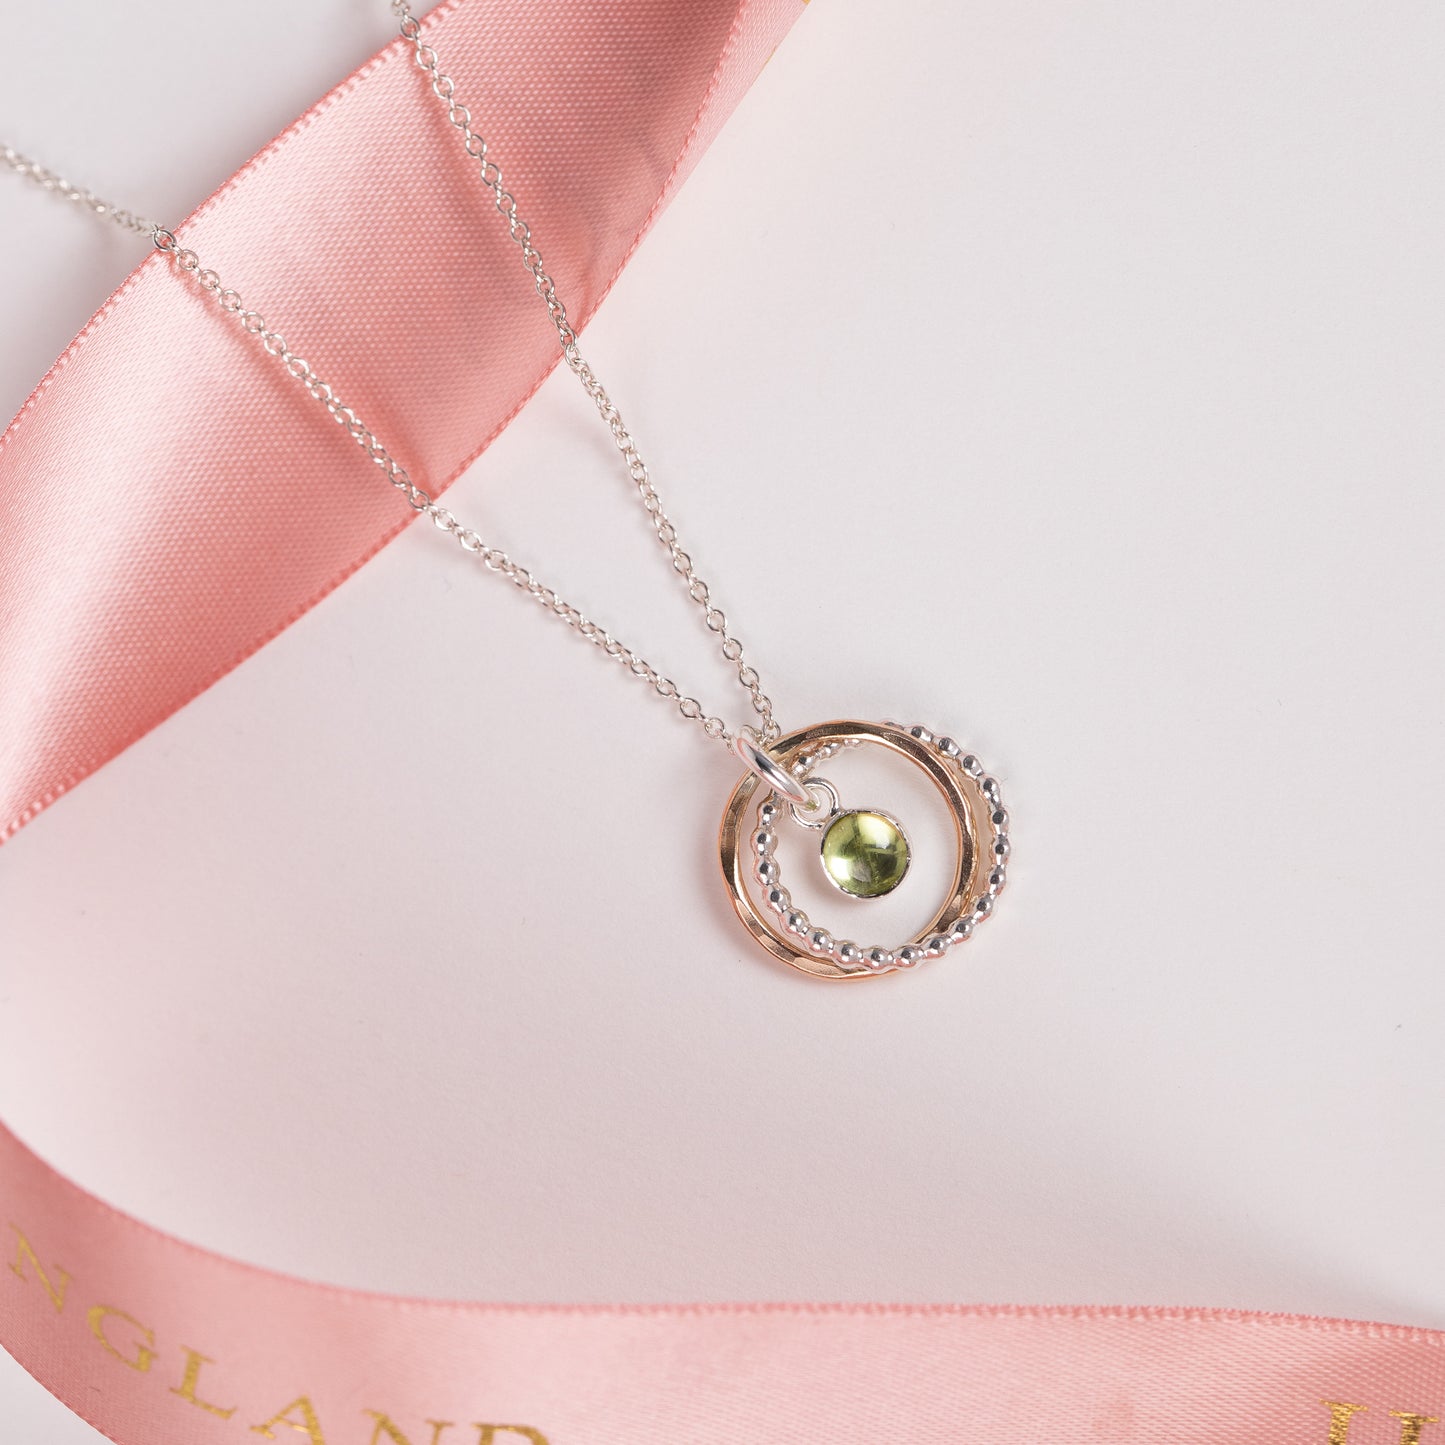 16th Anniversary Gift - Peridot Anniversary Necklace - Silver & Gold